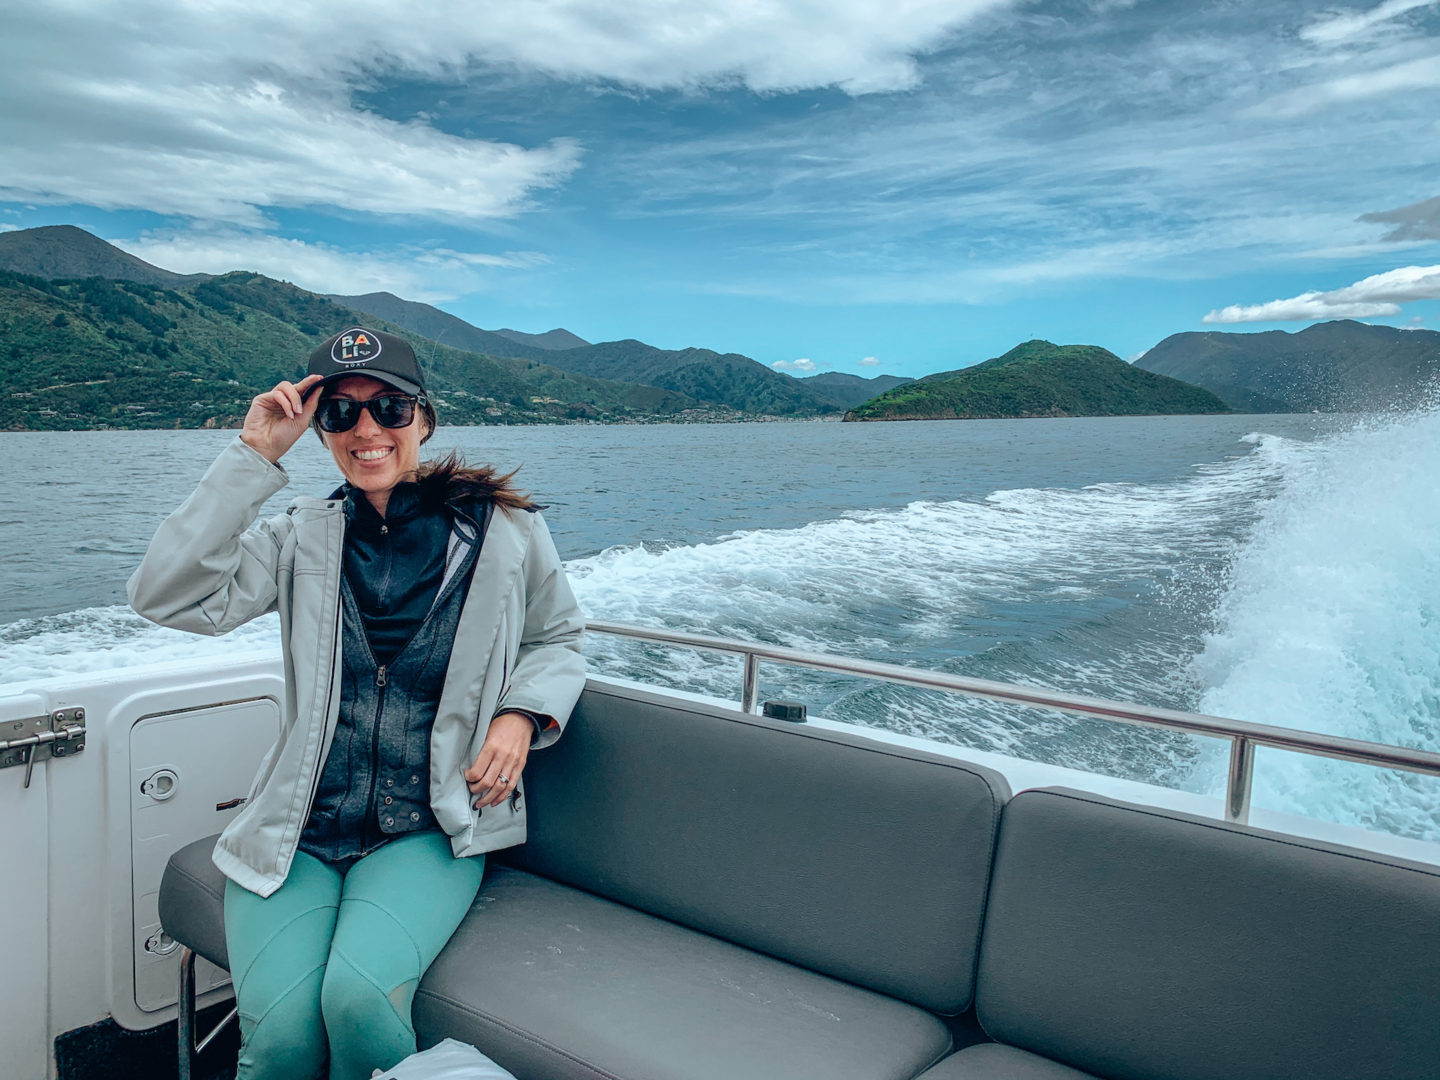 Ferry ride from Picton to Bay of Many Coves - Queen Charlotte Sound, New Zealand